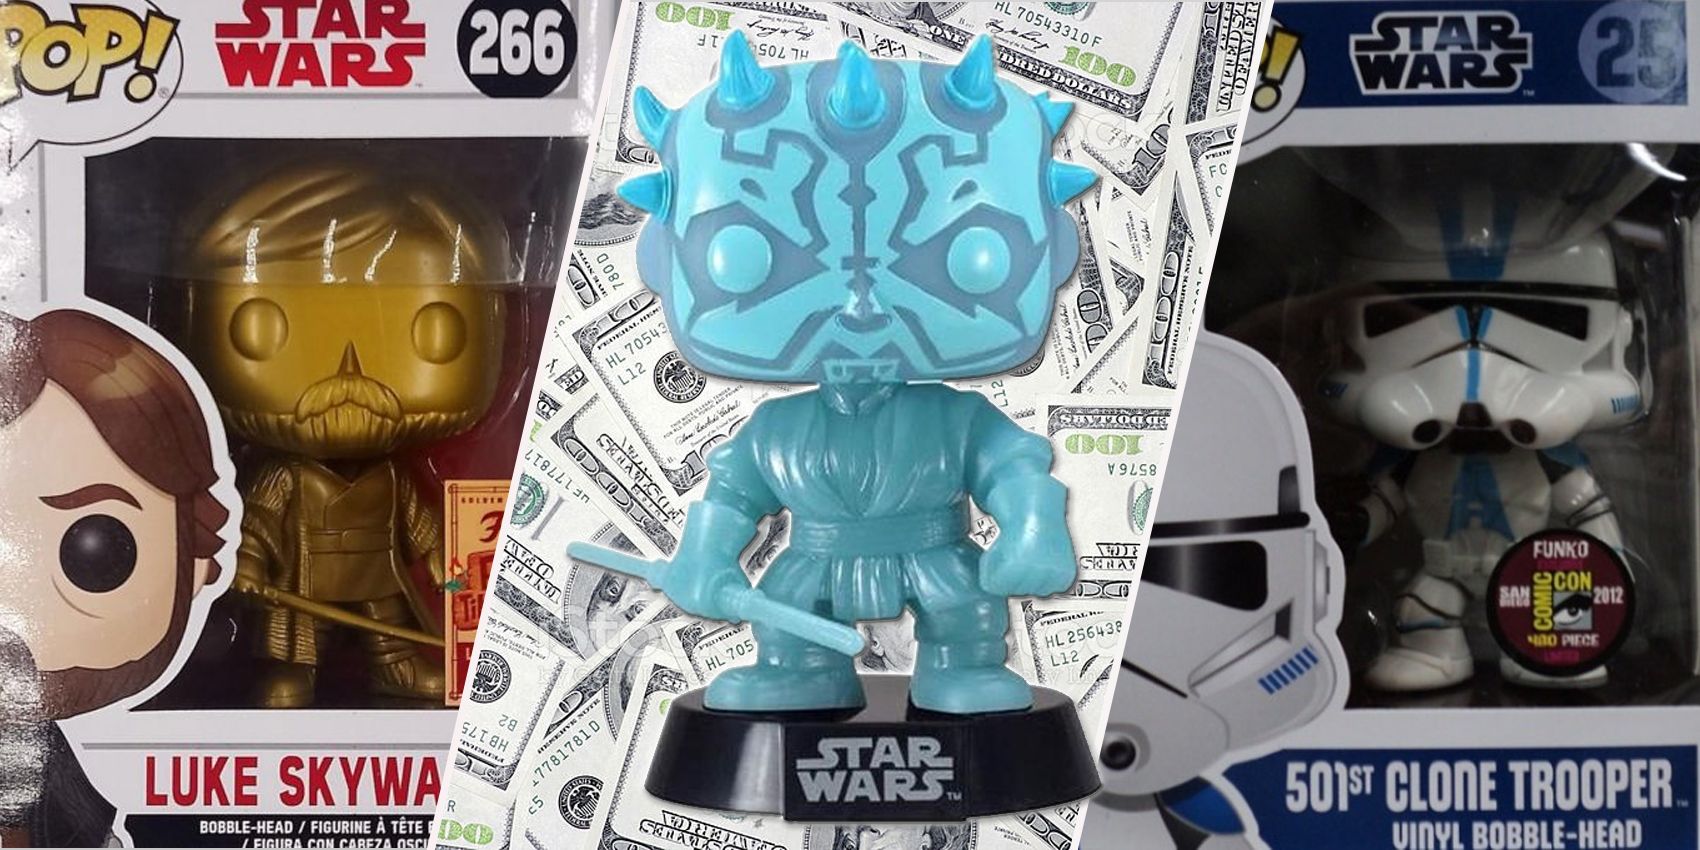 10 Star Wars Funko Pop Figures Worth Over $500 (That You Might Have)